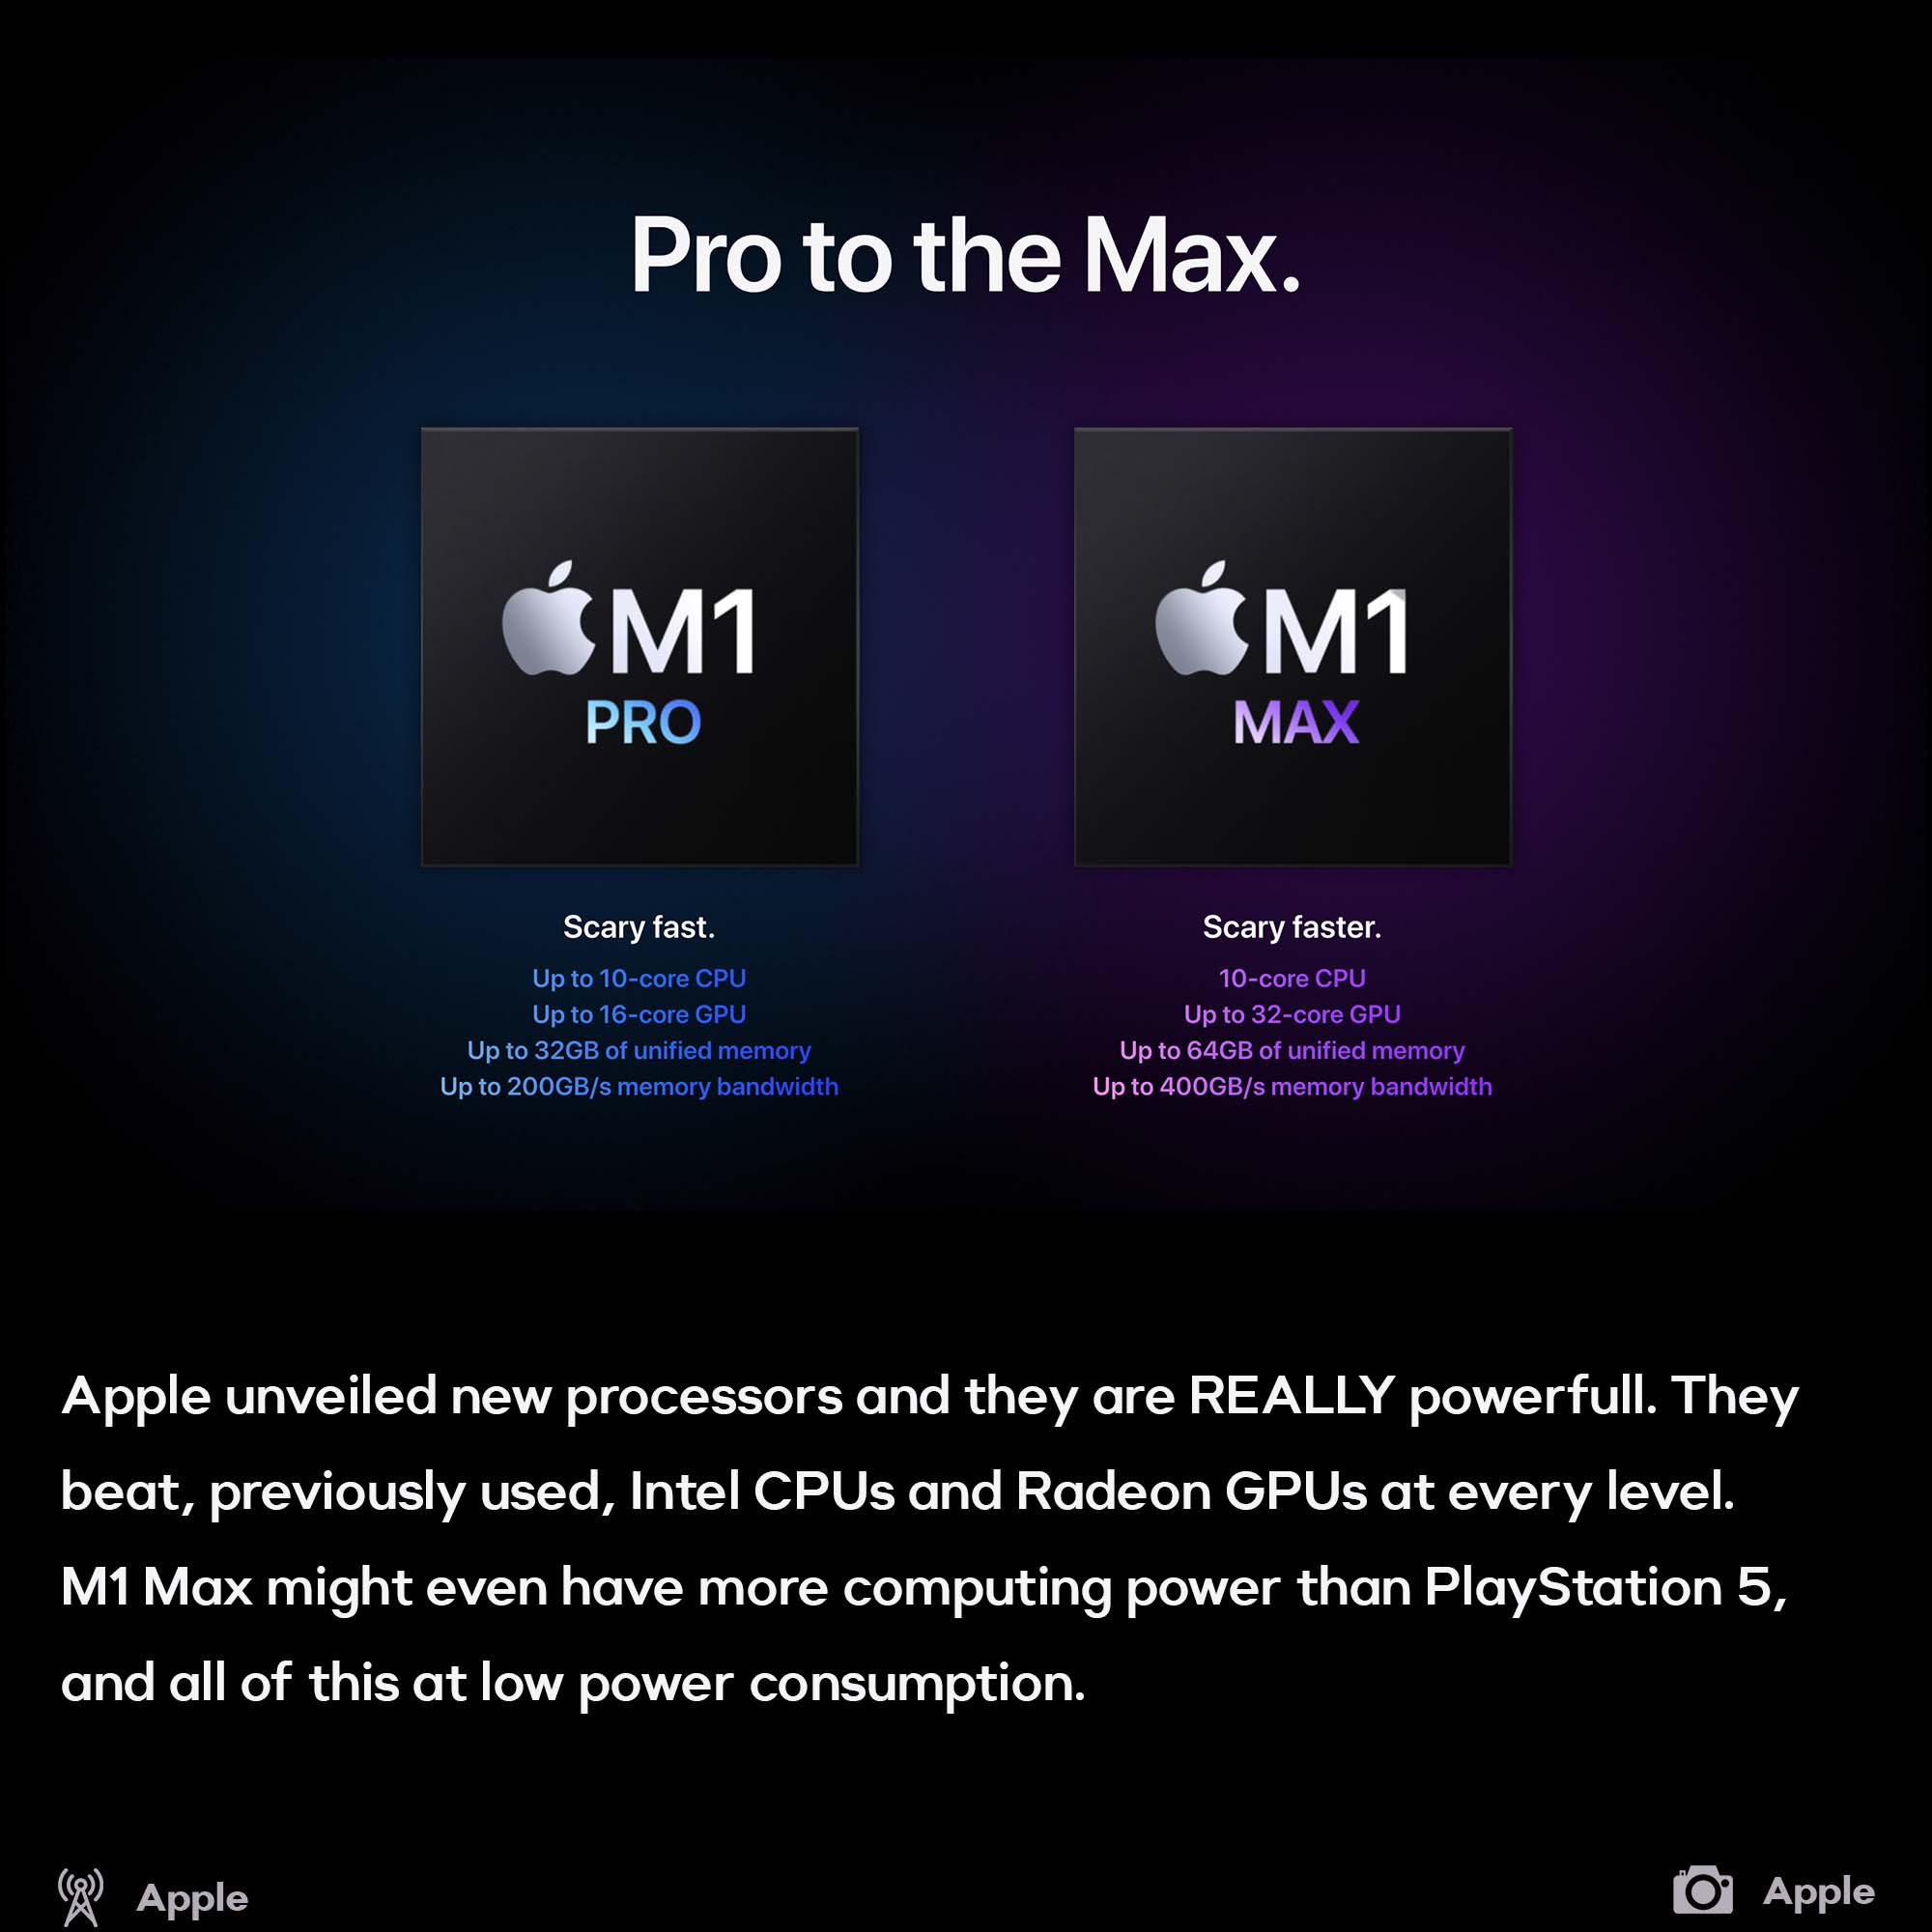 M1 Pro and M1 Max chips are very powerfull